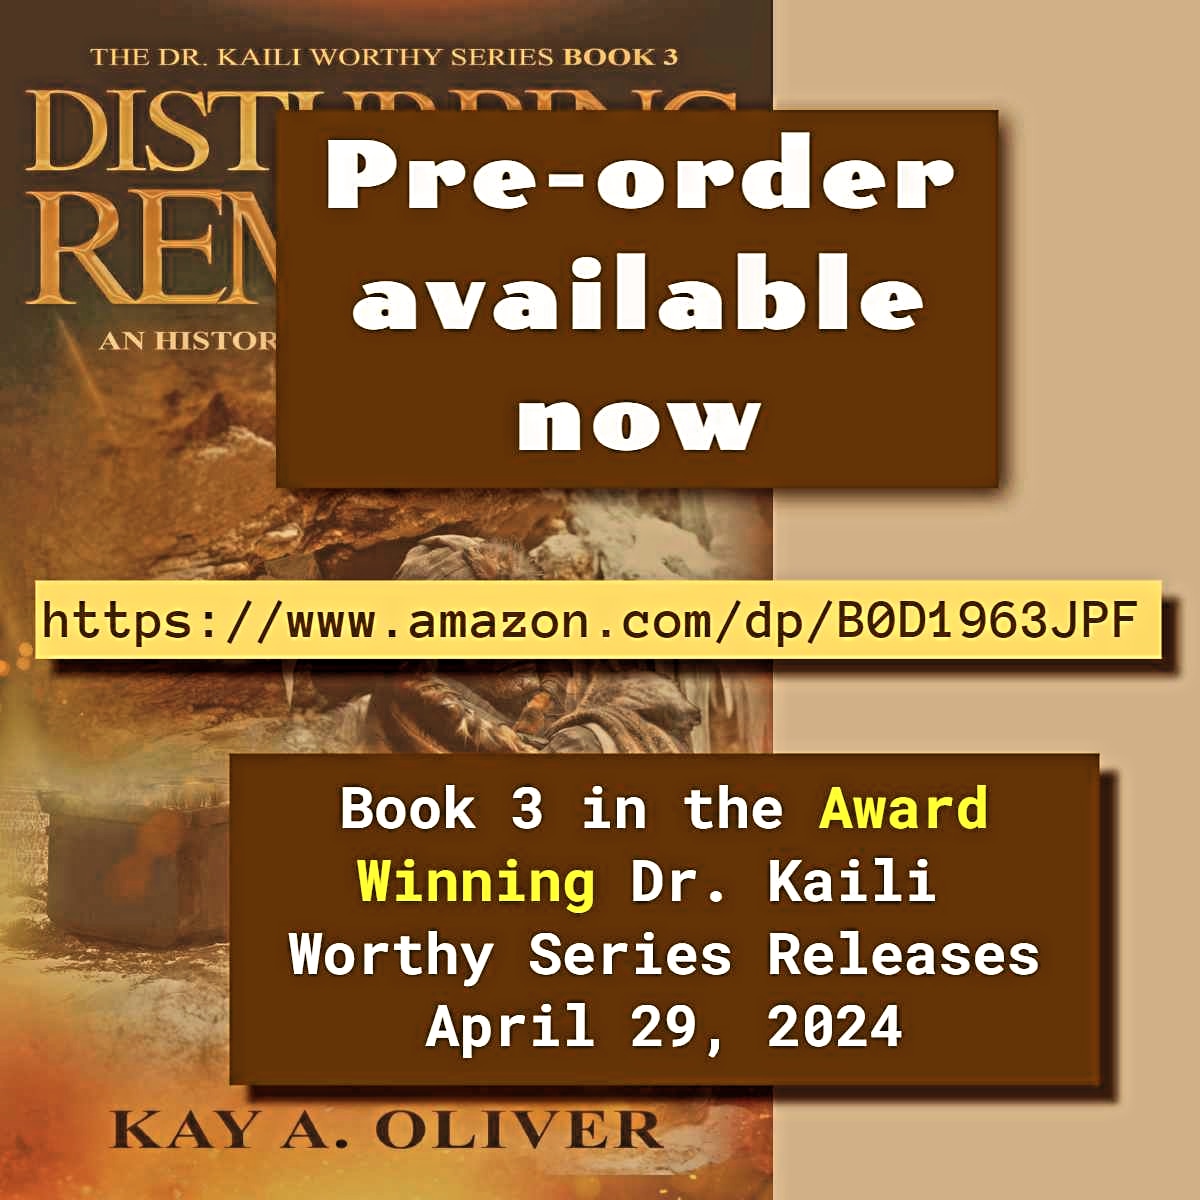 Get ready to dive into the thrilling world of Dr. Kaili Worthy once again! Book 3 of the award-winning series is available for Pre-Order,  Release April 29, 2024.
 #NewBook #PreOrder #DrKailiWorthy #AwardWinningSeries #preordernow

amazon.com/dp/B0D1963JPF